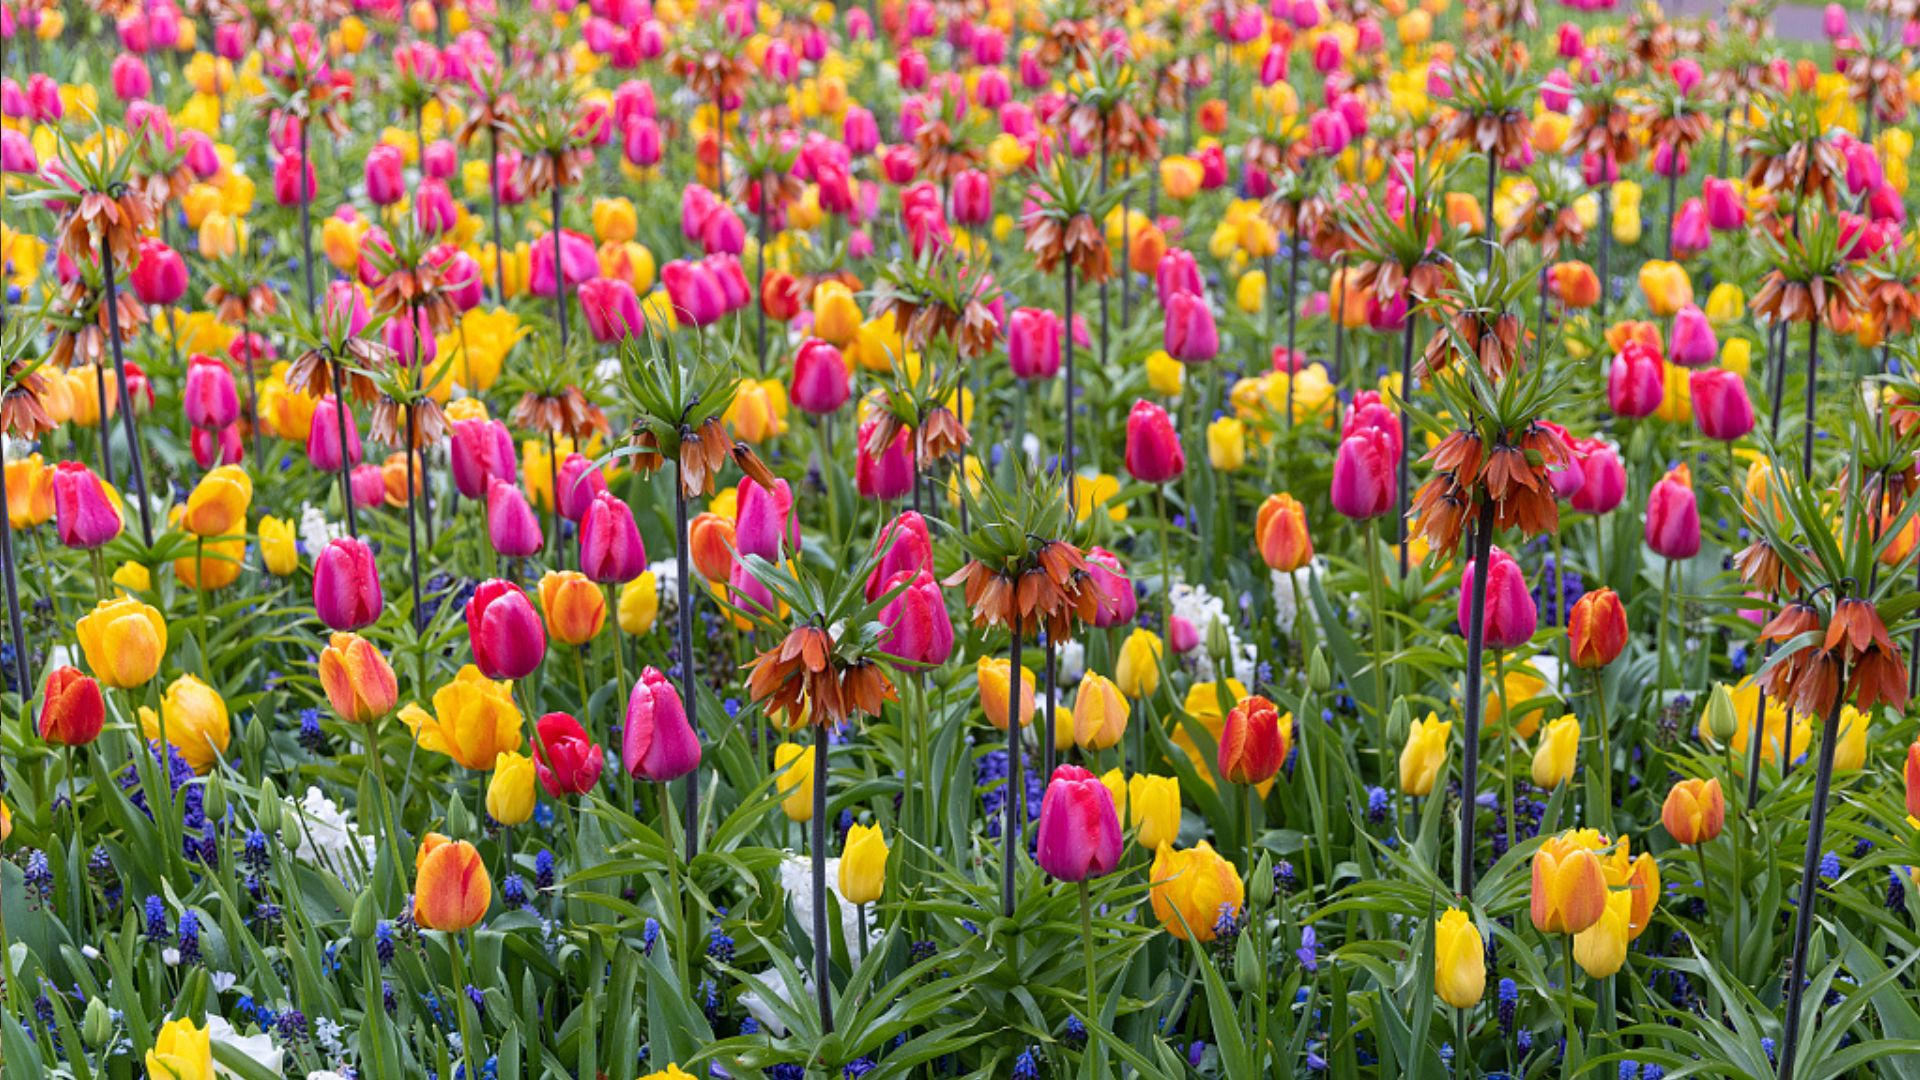 Tulips bloom in the Keukenhof Park in Lisse, Netherlands. /Roger Anis/Getty Images